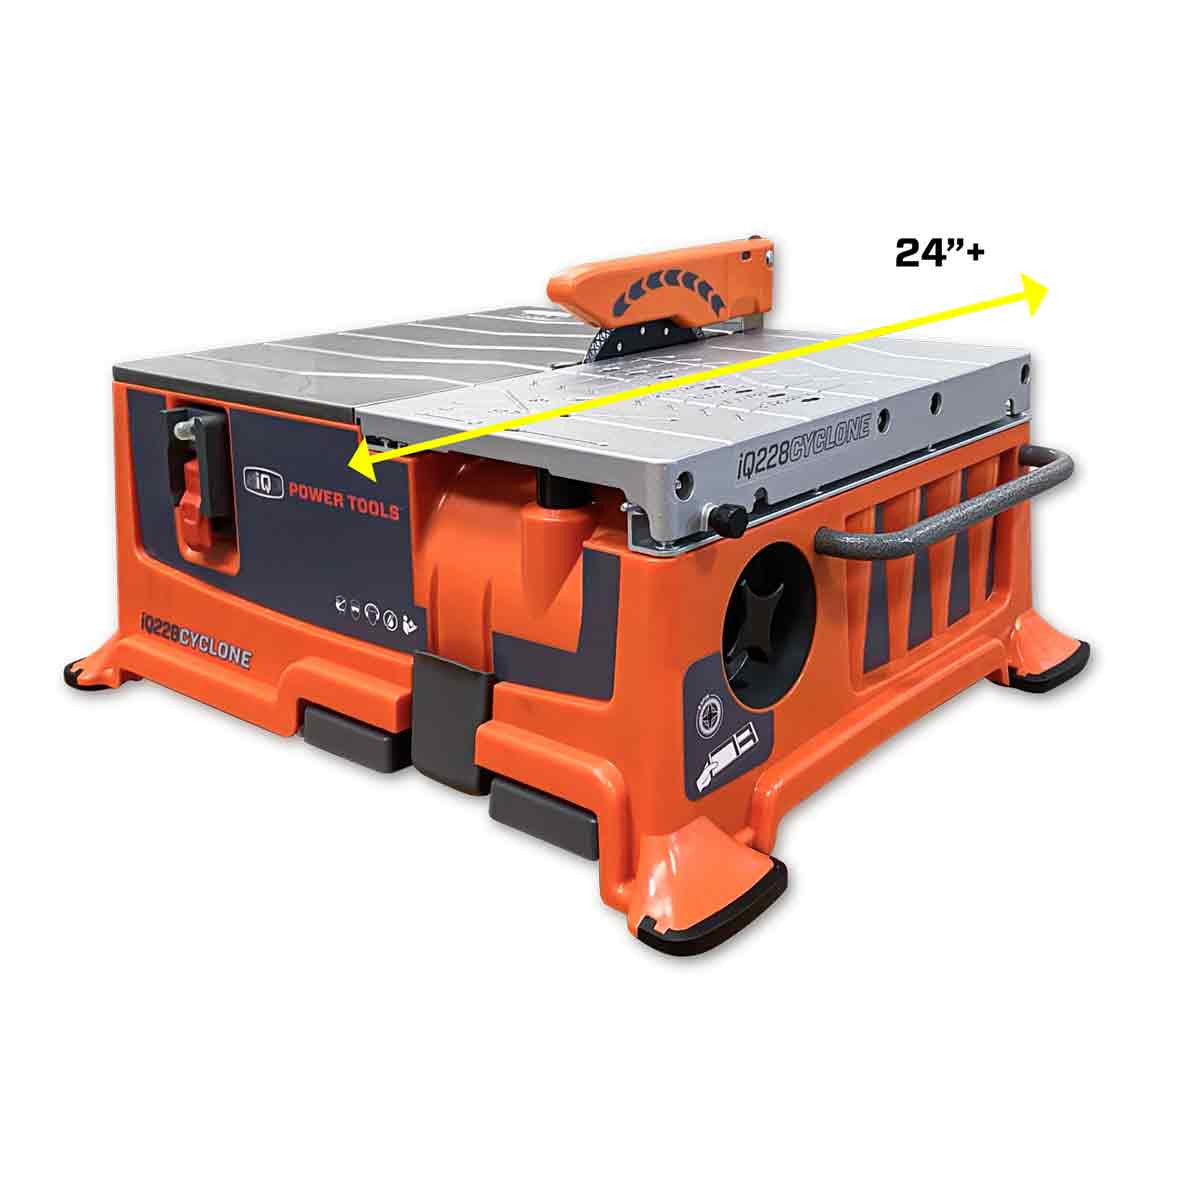 7" Dustless Dry Cut Bench/Tabletop Tile Saw with Integrated Dust Control and TRU-CUT System